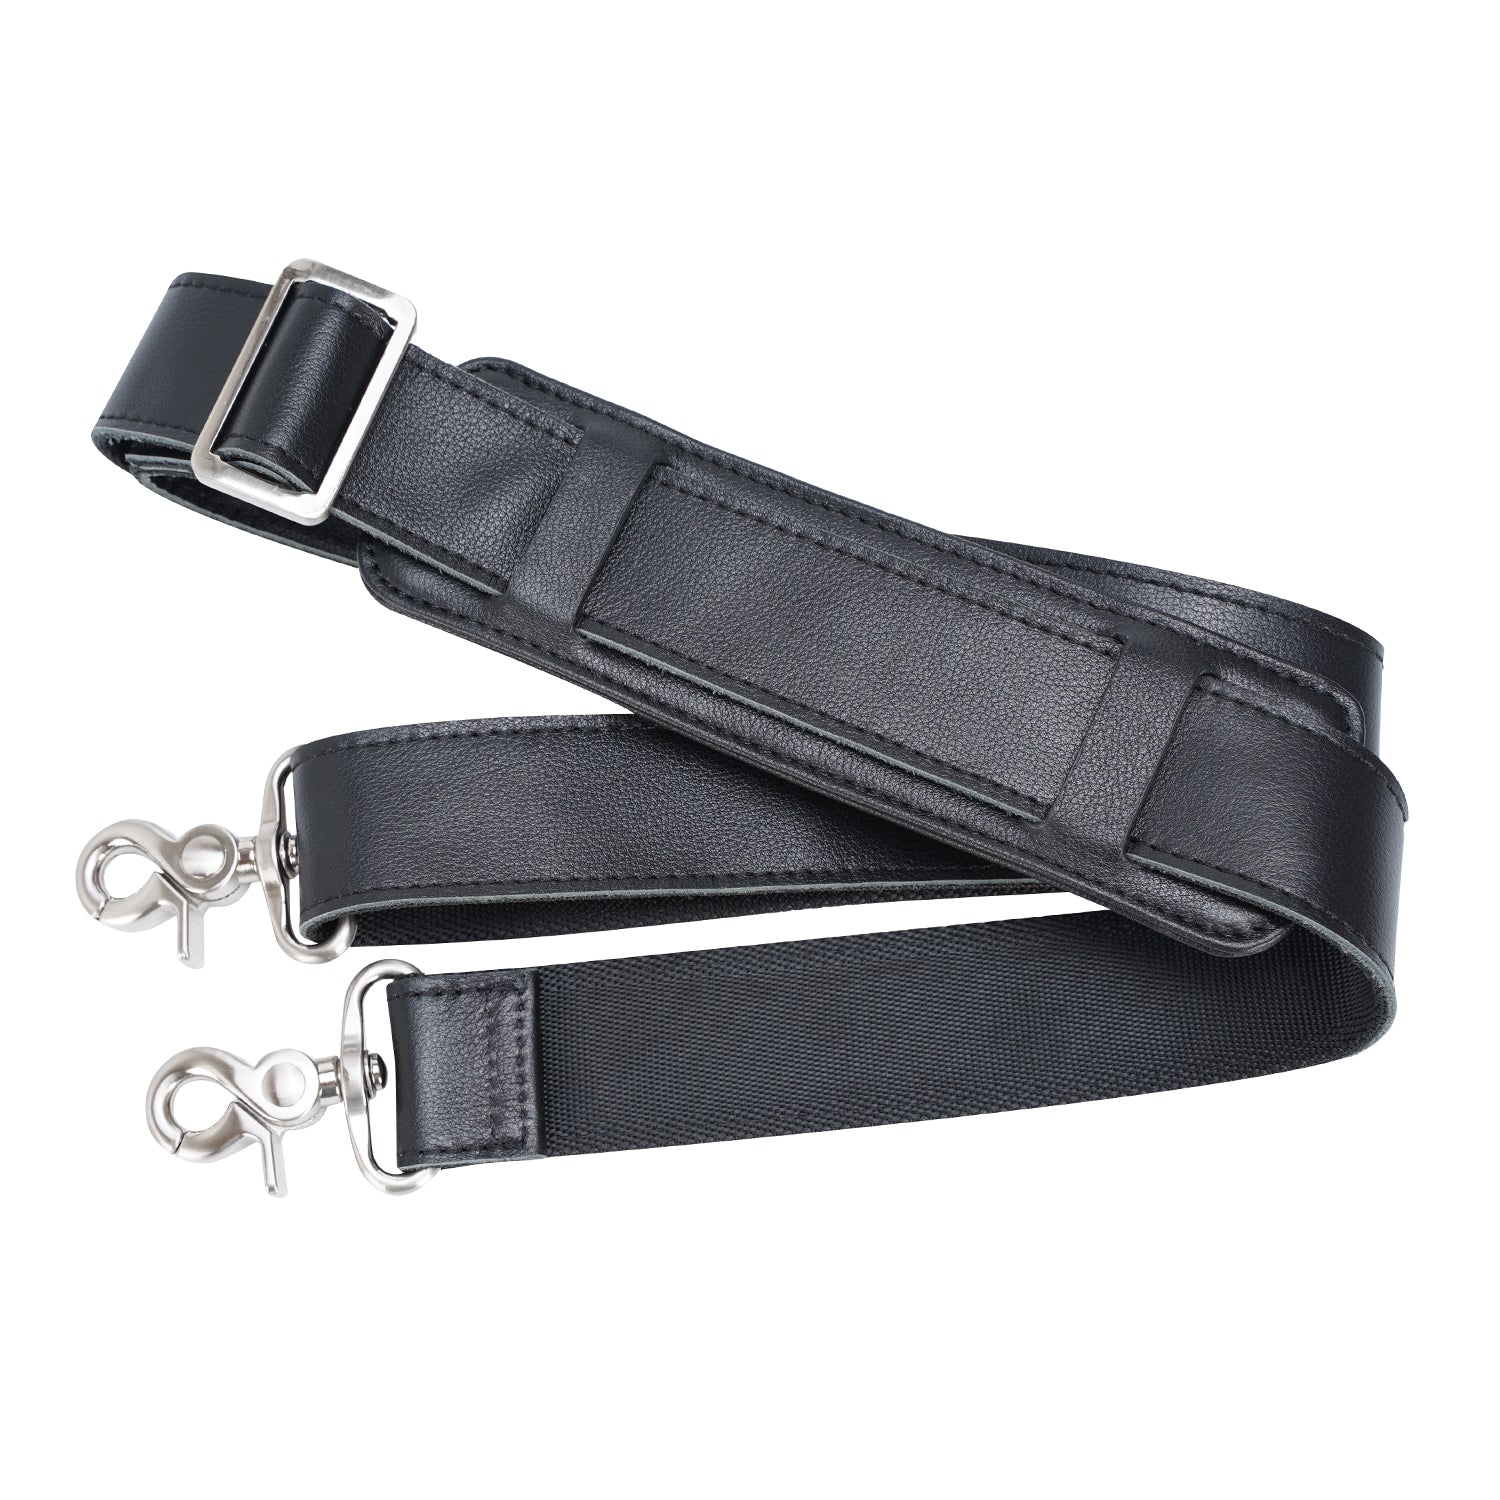 60-inch Genuine Black Leather Shoulder Straps for Bags Perfect